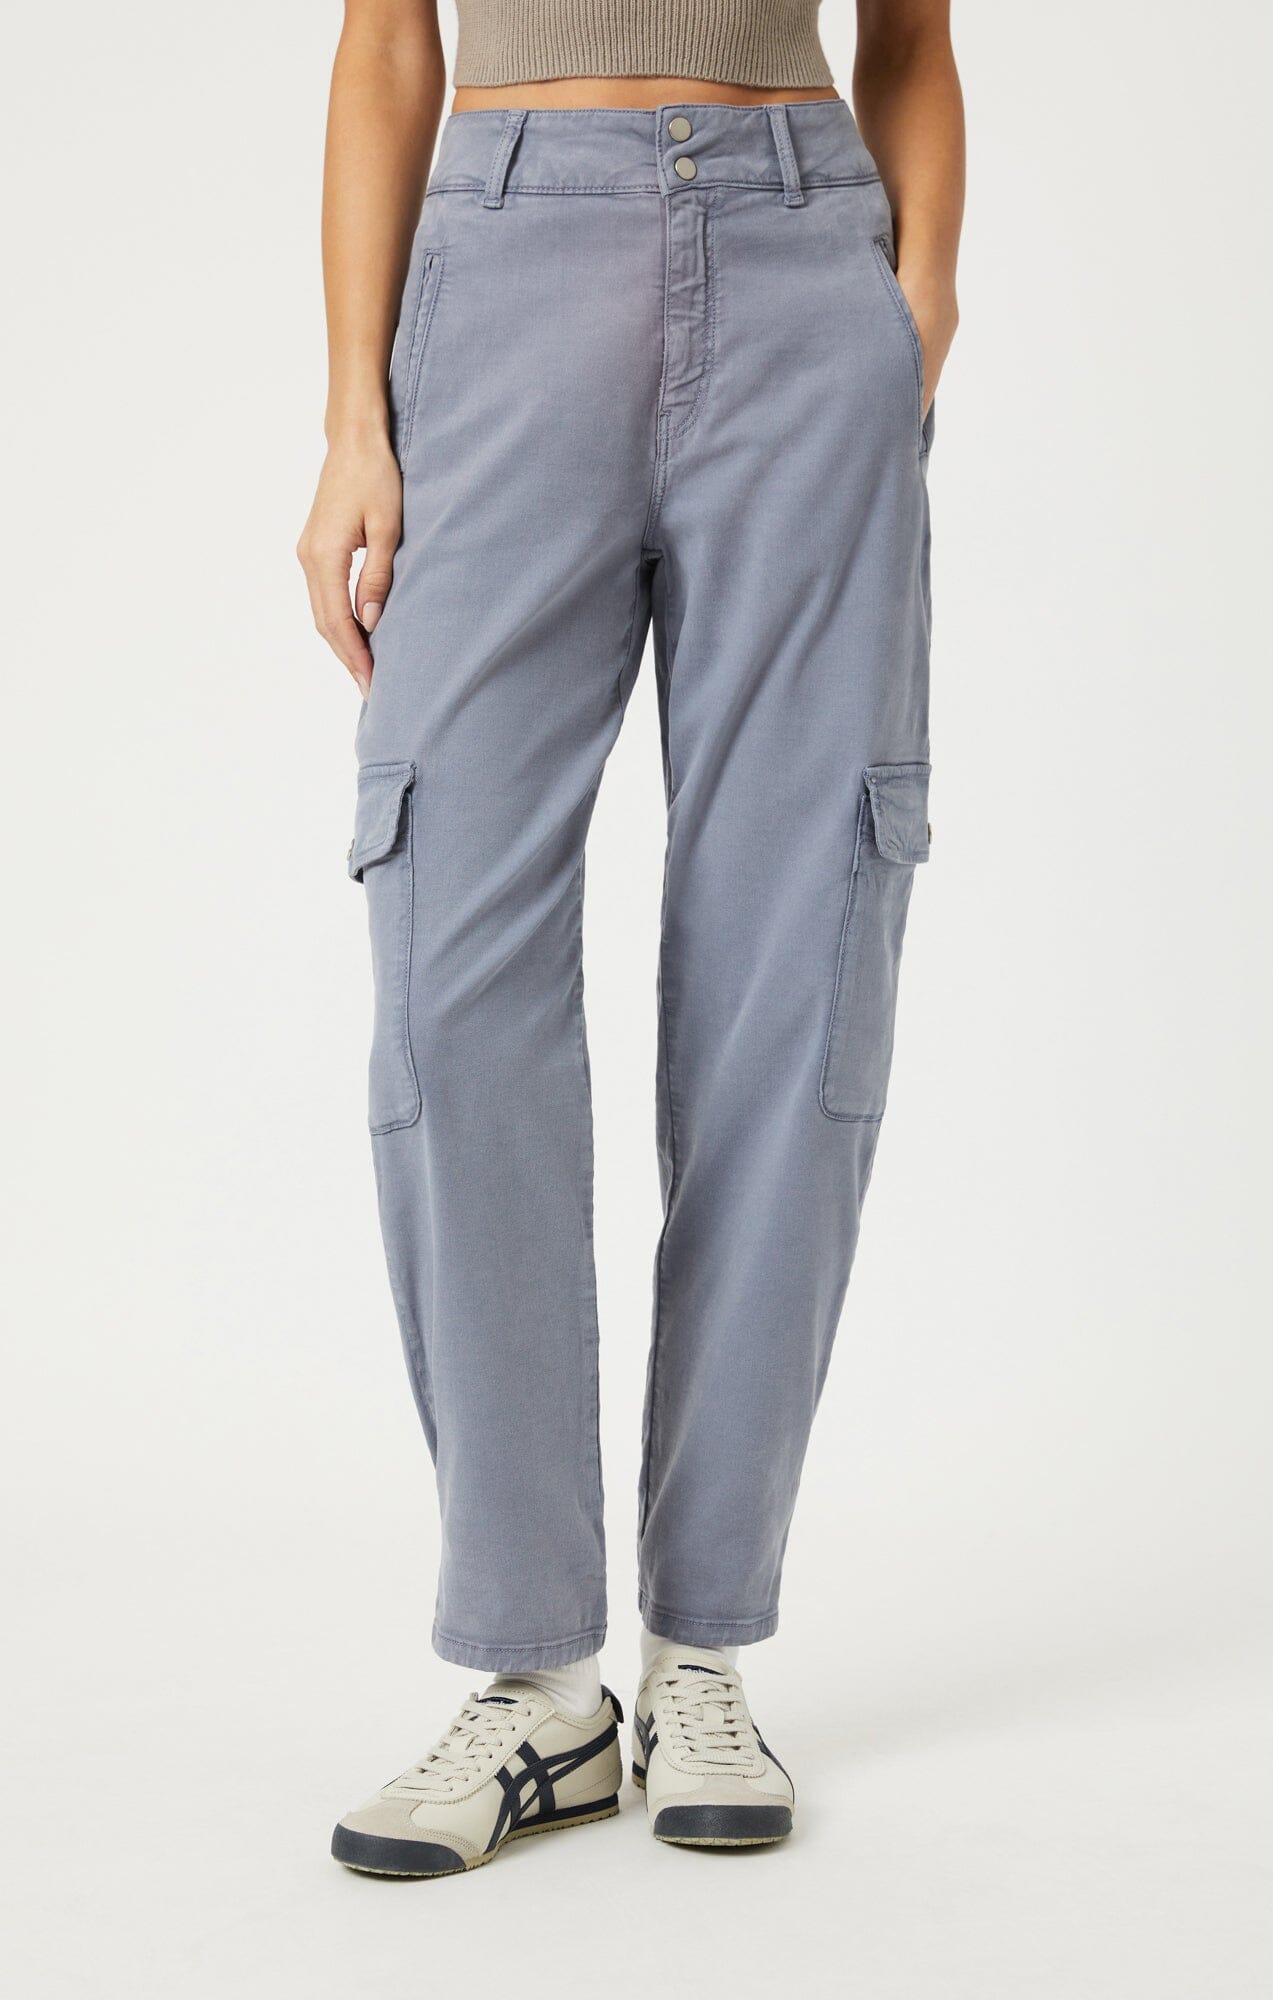 Boden Utility Cargo Trousers, Pebble at John Lewis & Partners